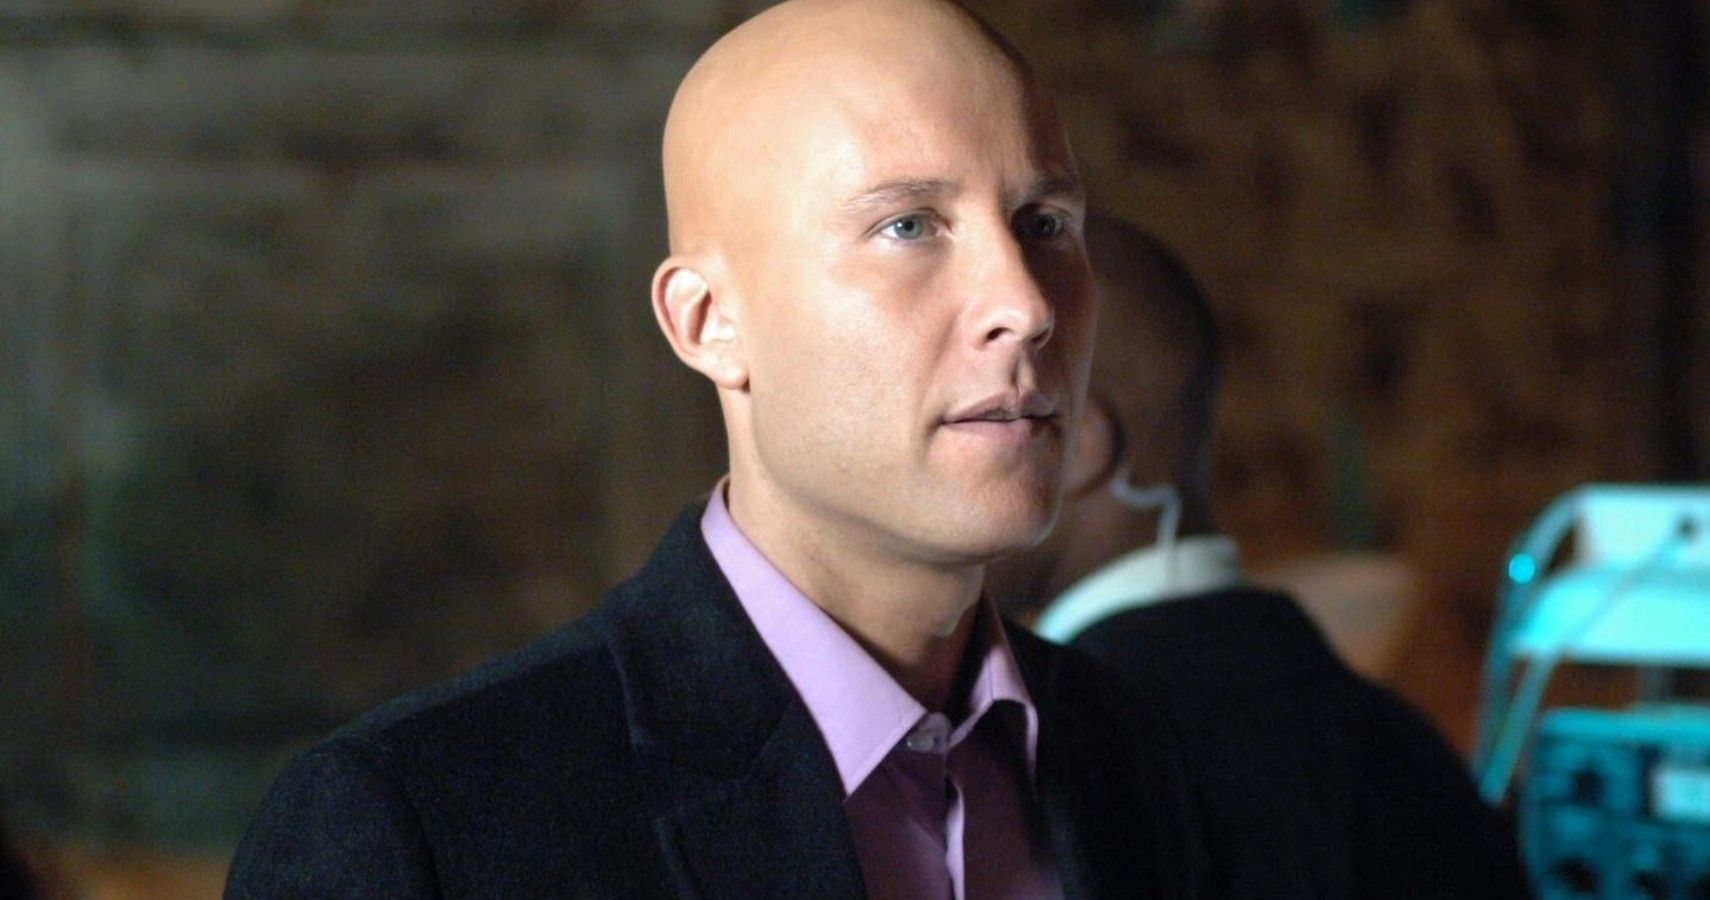 Smallville 5 Times We Felt Bad For Lex Luthor (& 5 Times We Hated Him)